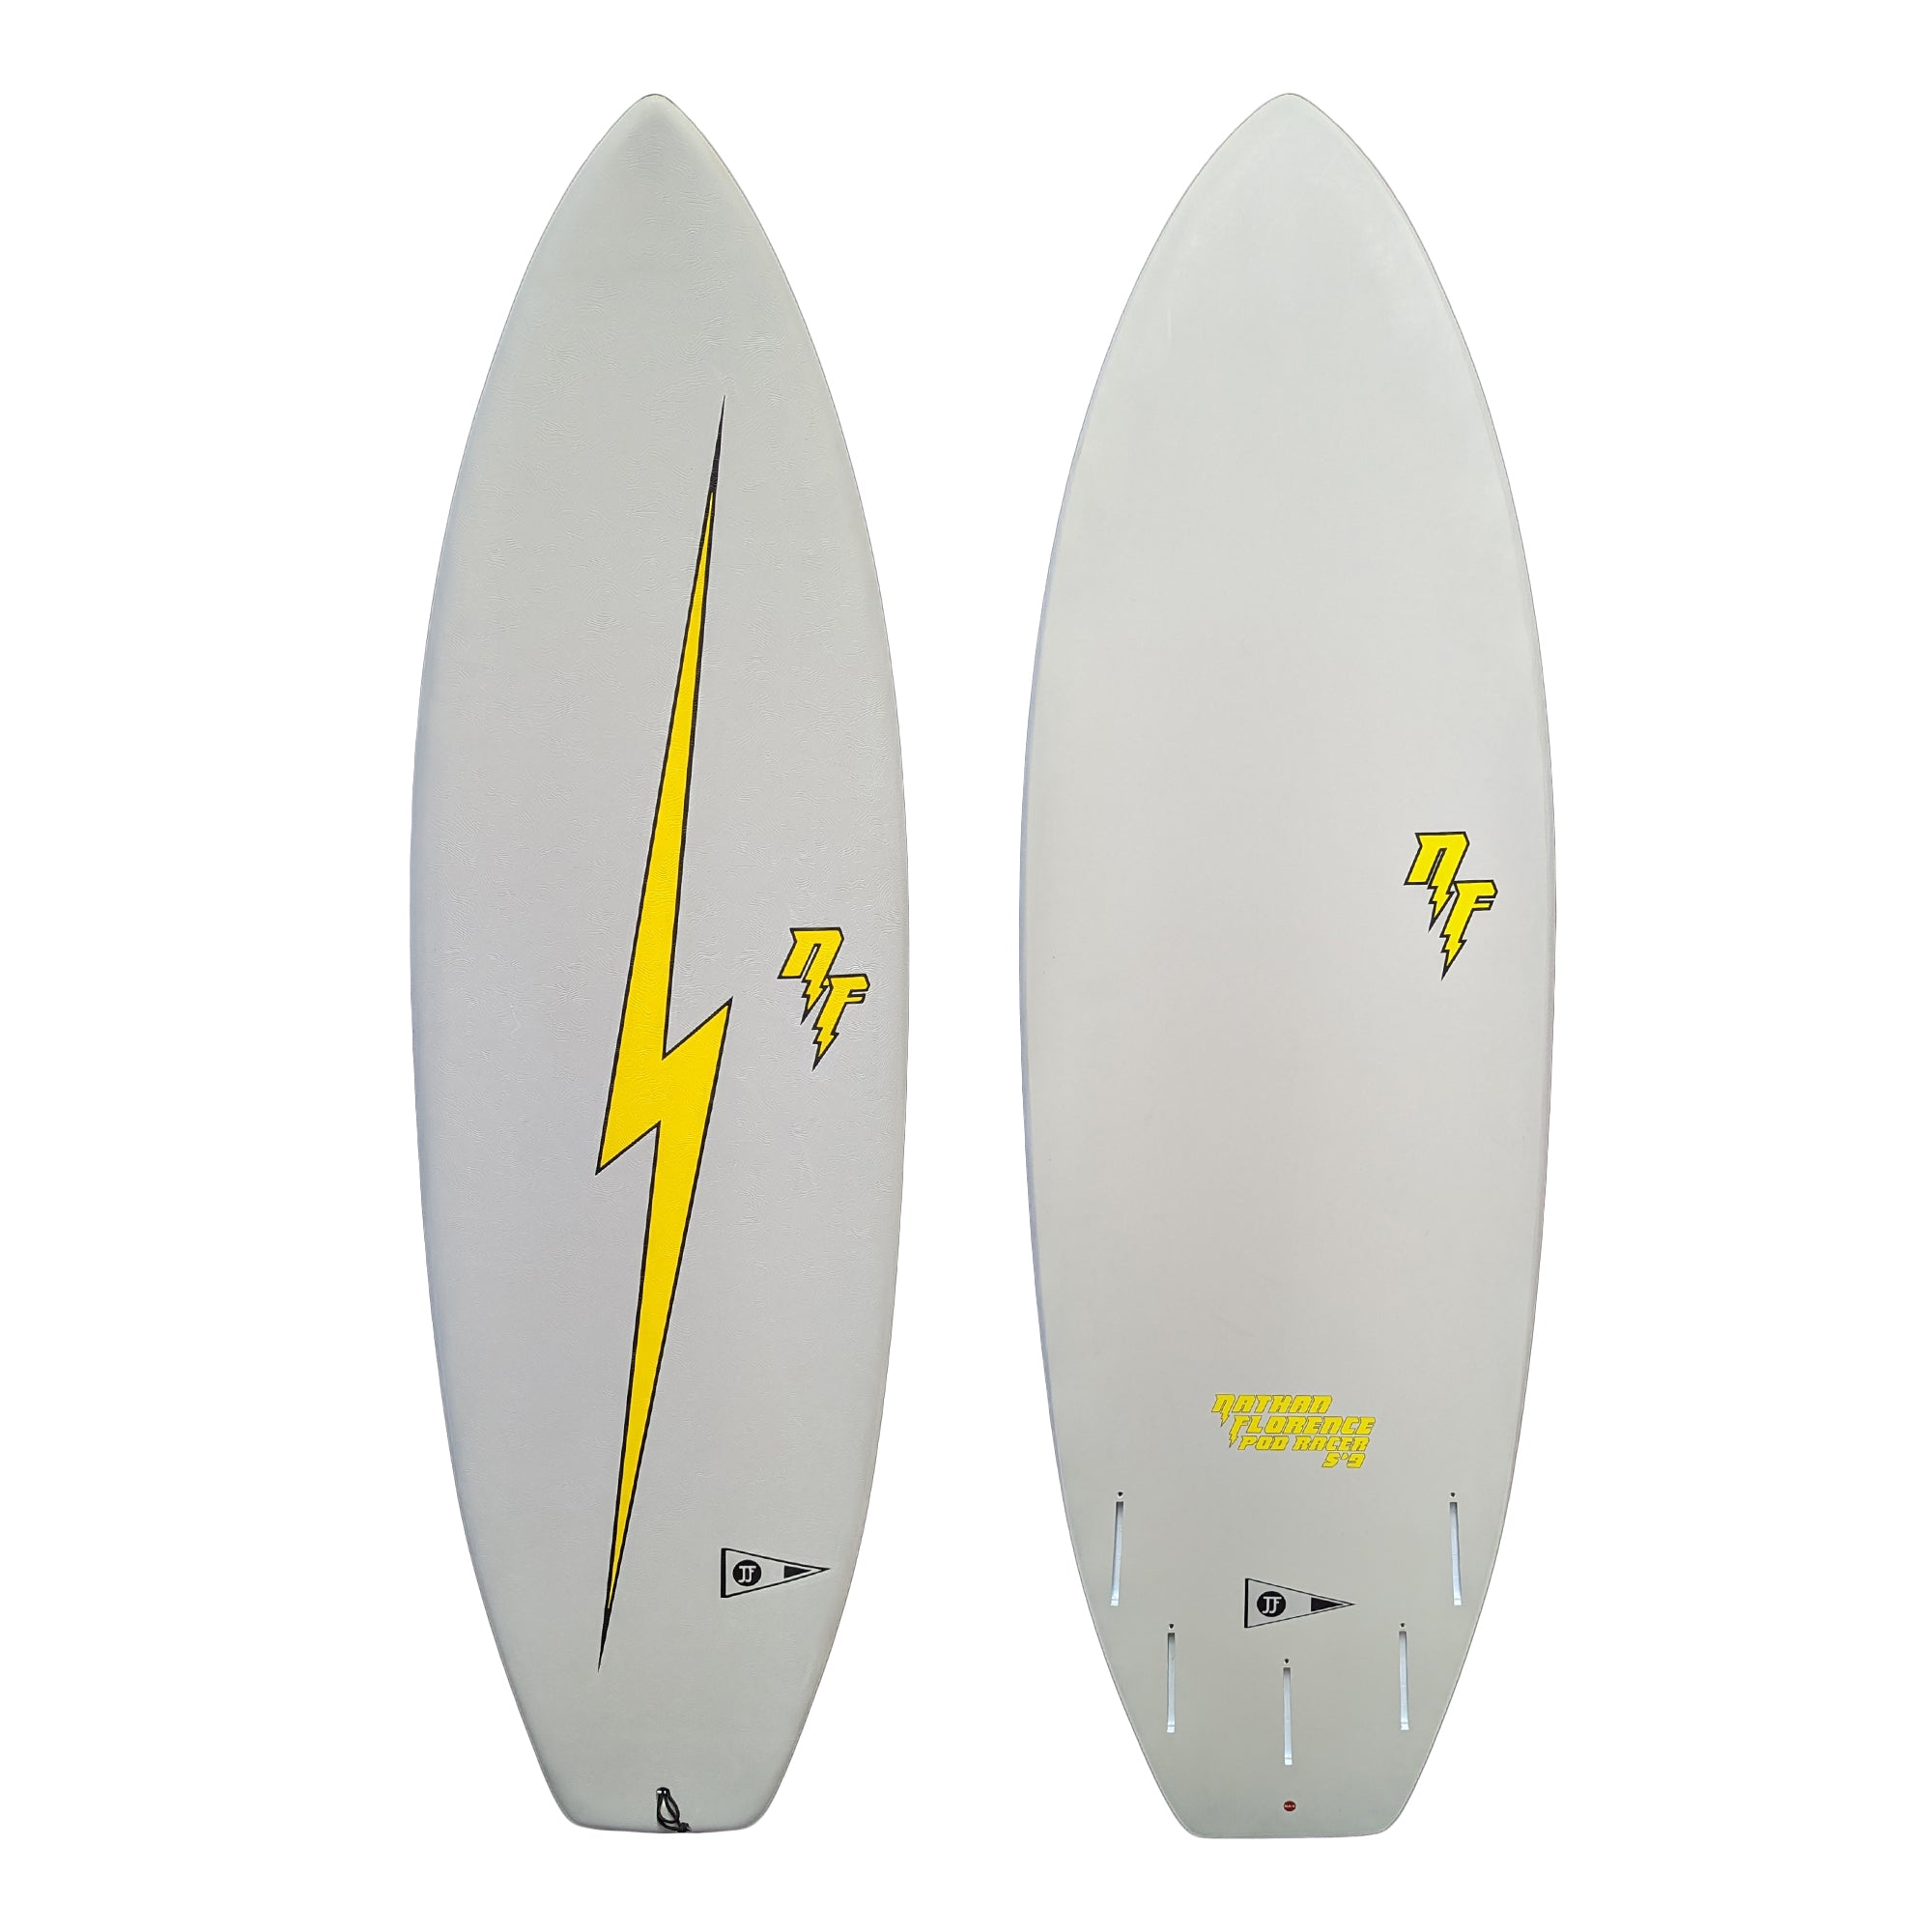 JJF by Pyzel Nathan Florence Pro Pod Racer Demo Surfboard